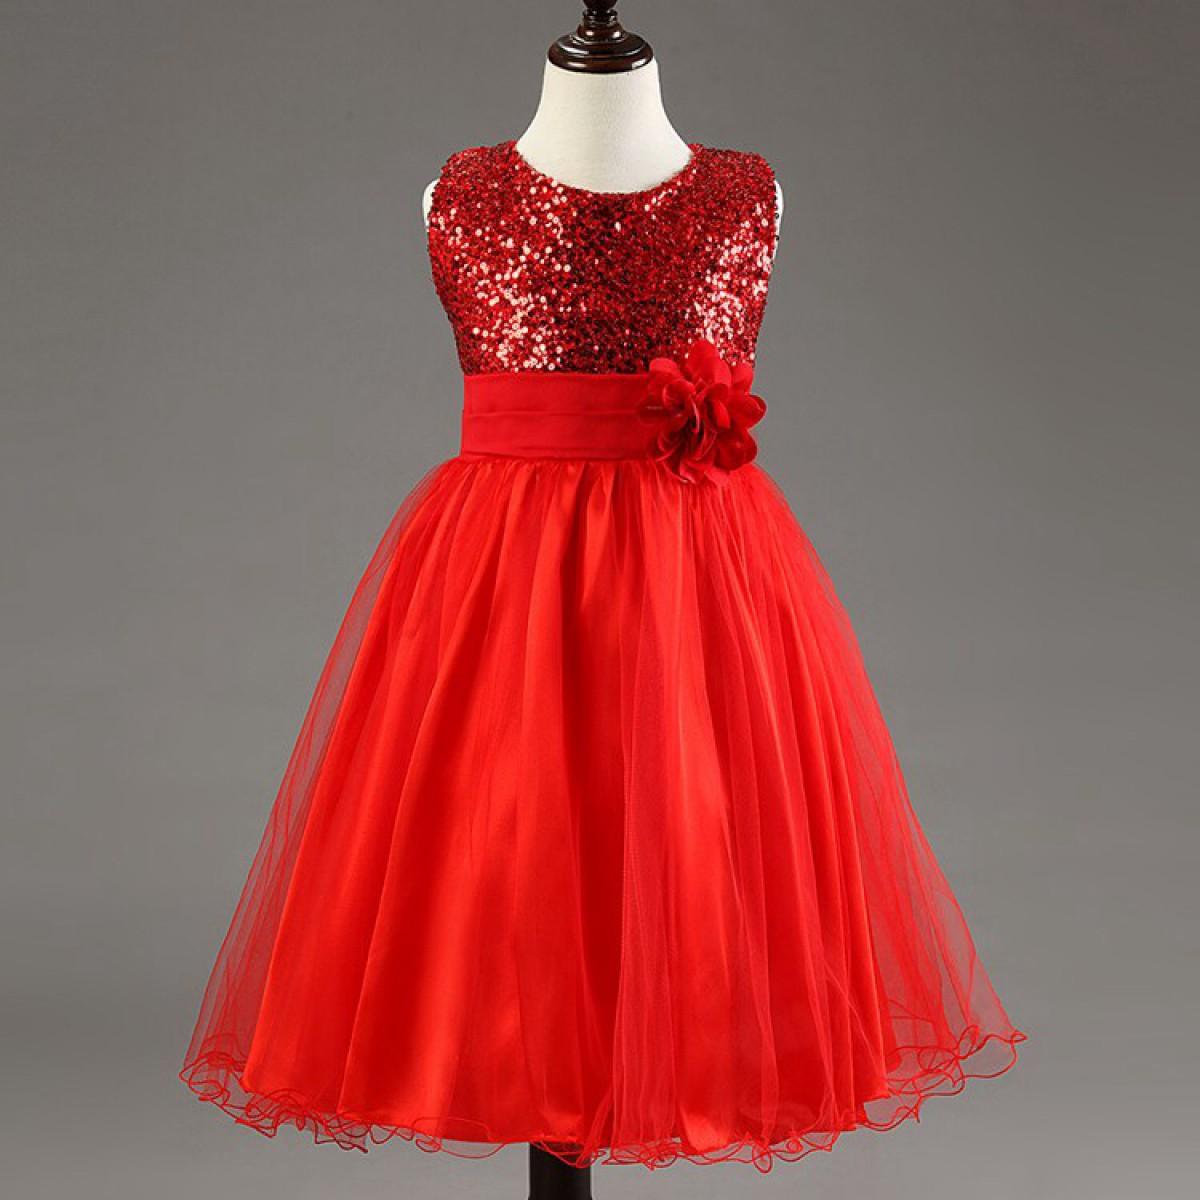 Robe fille rouge